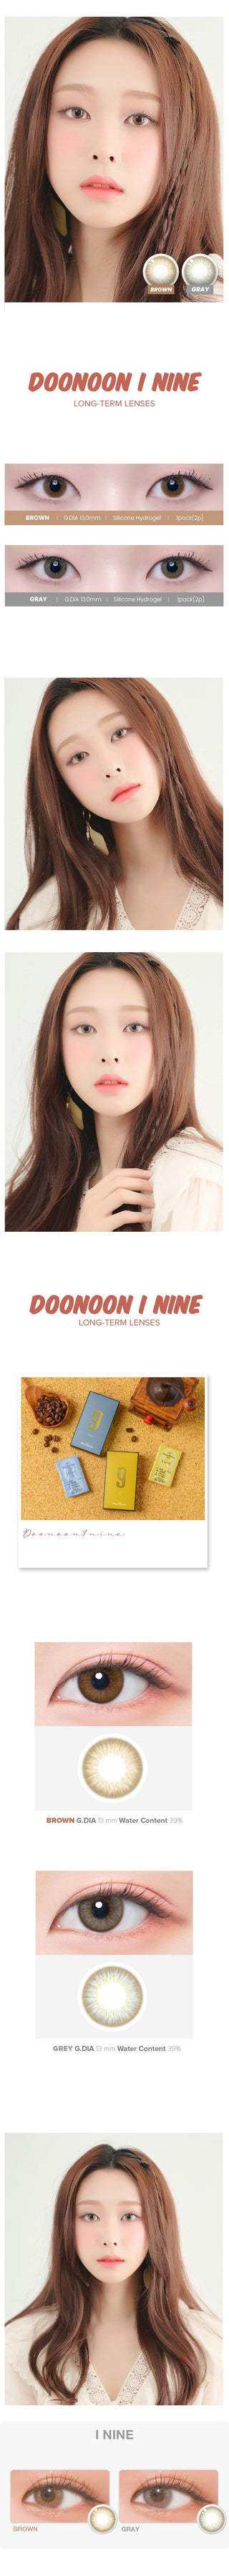 Variety of DooNoon I Nine Brown contact lens colors displayed, with closeups of an eye wearing the contact lens colors, and with a model wearing the contact lens colors showing realistic eye-enlarging effect from various angles.